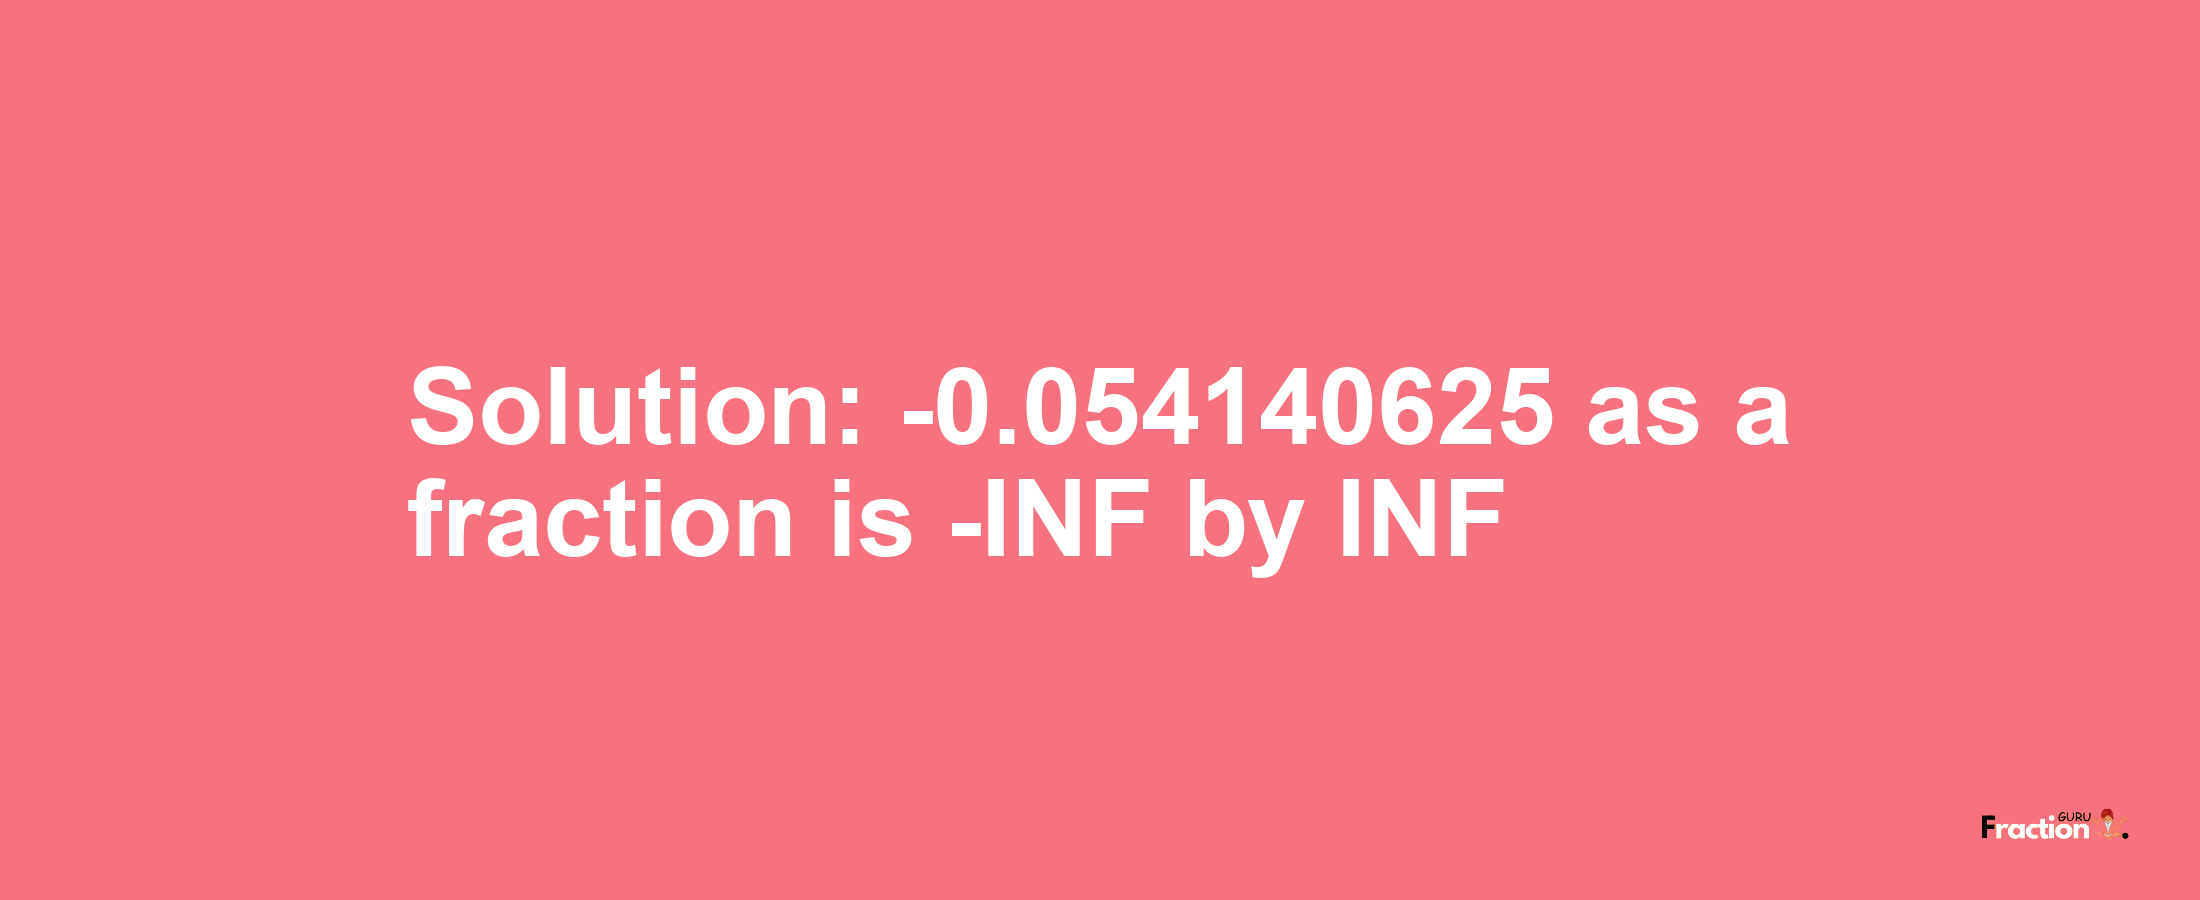 Solution:-0.054140625 as a fraction is -INF/INF